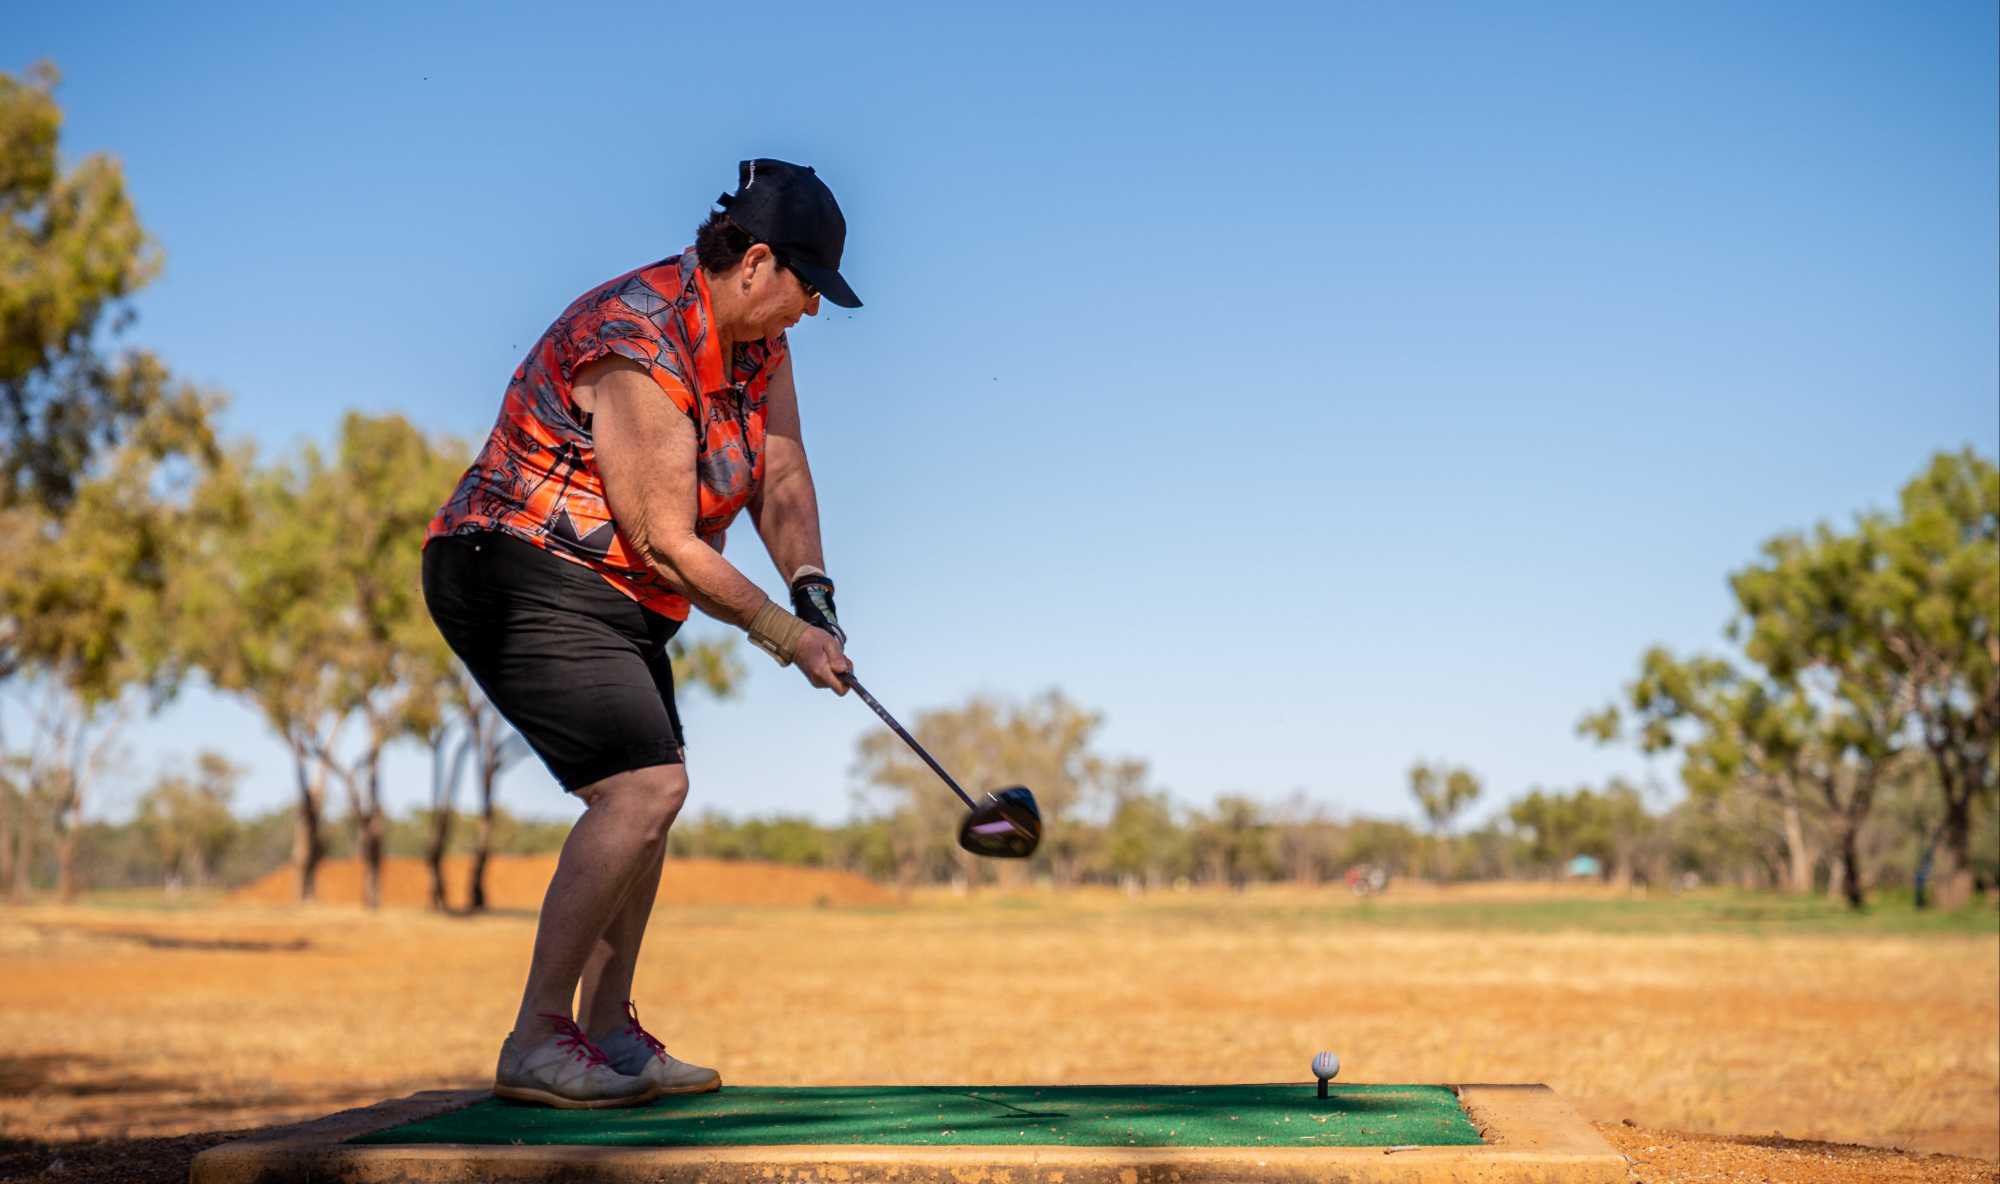 Hole-in-one for outback